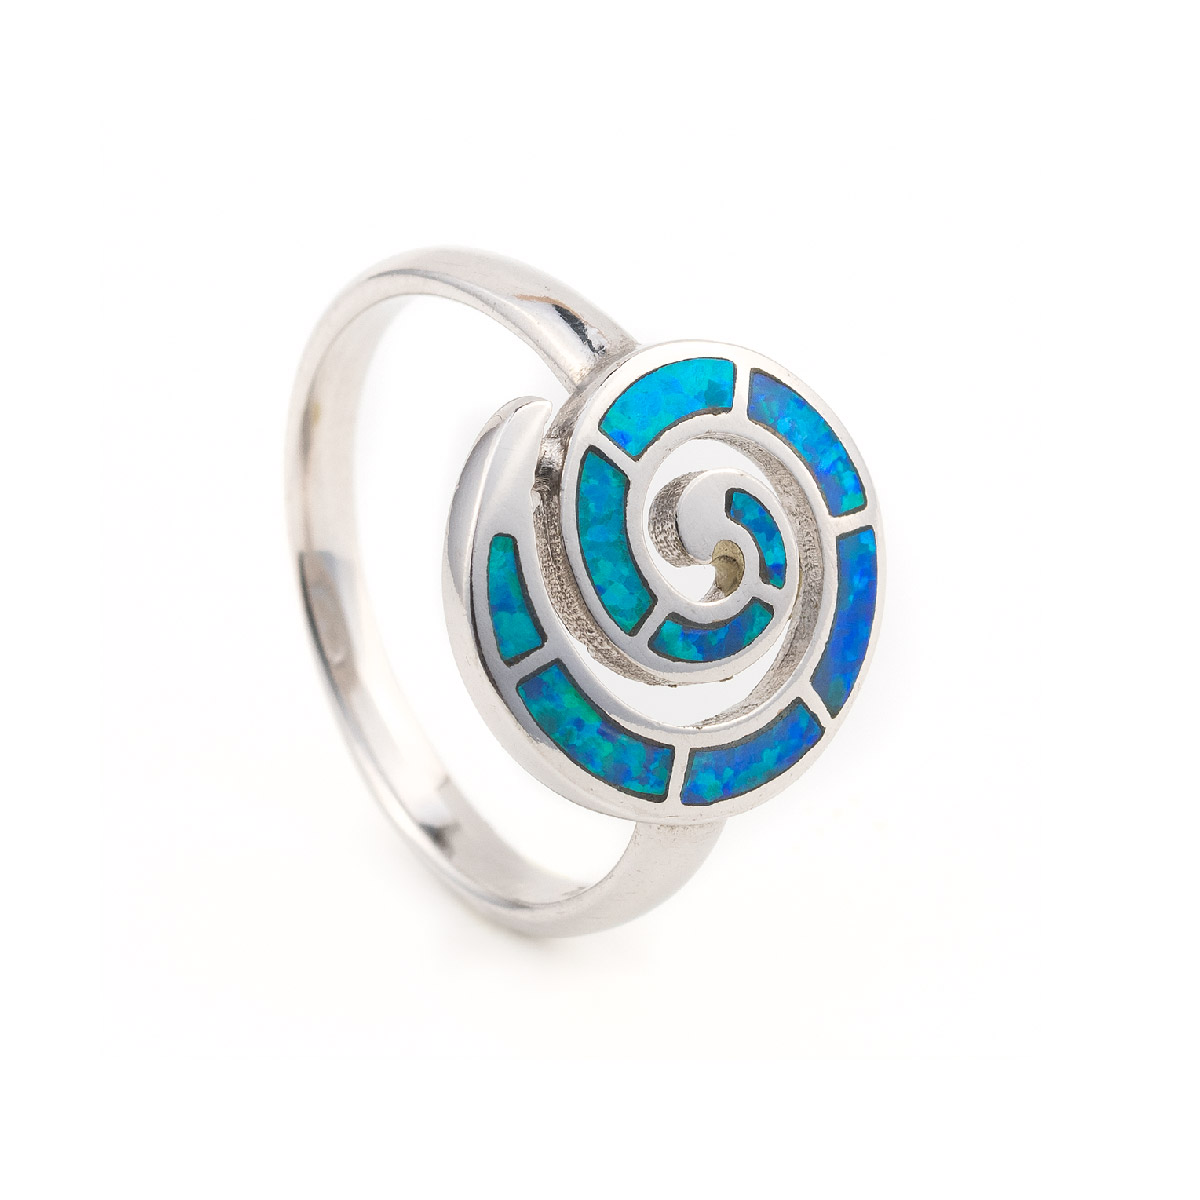 Adjustable Silver Spiral Wrap RIng - Seamack Jewelry